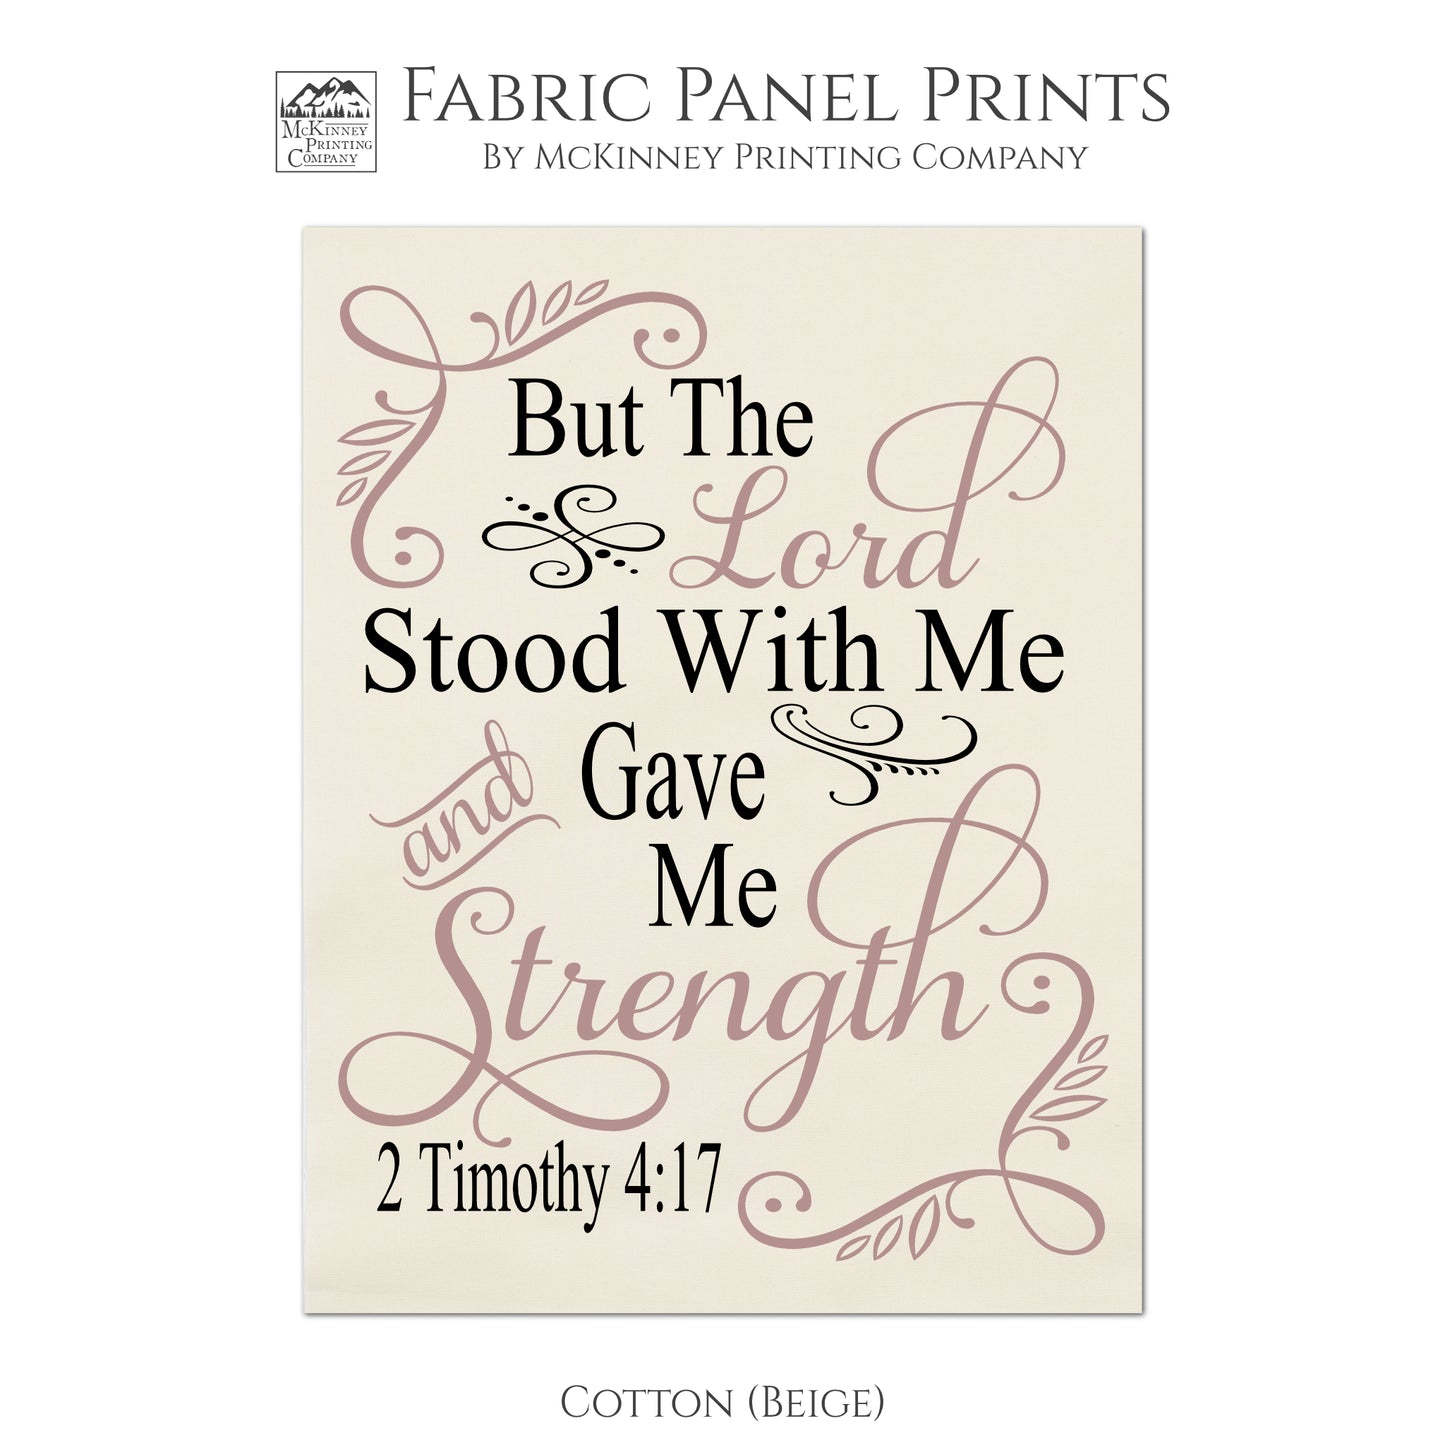 2 Timothy 4:17, But the Lord Stood With Me and Gave Me Strength